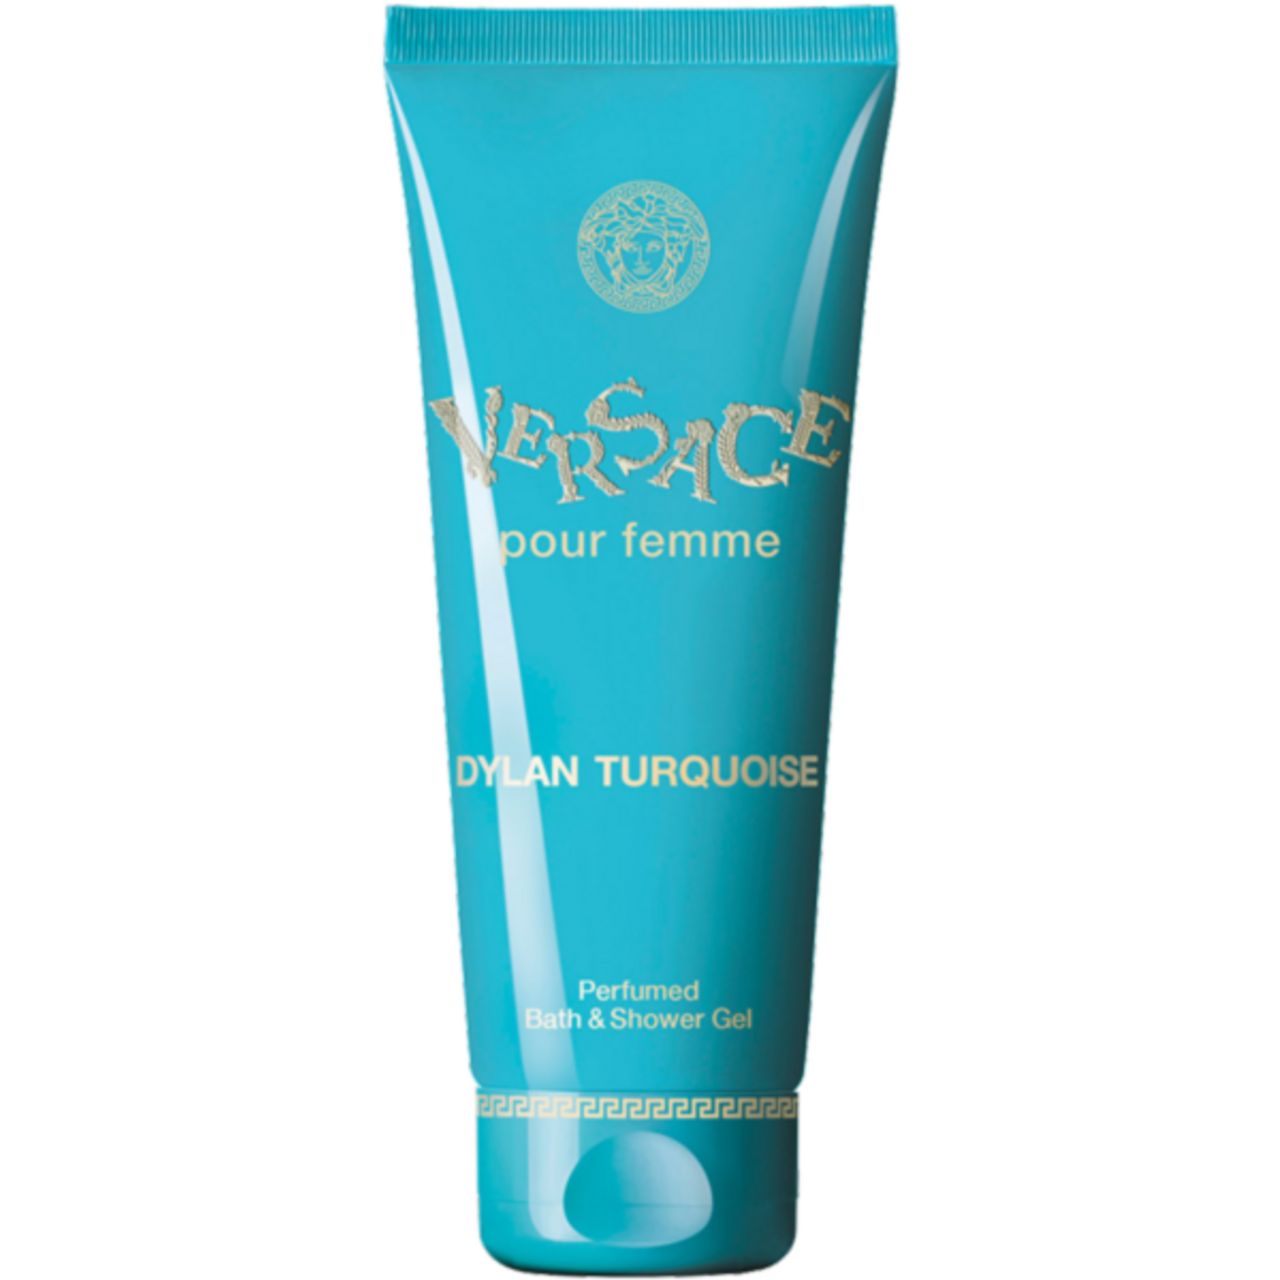 Versace Dylan Turquoise pour femme Shower Gel